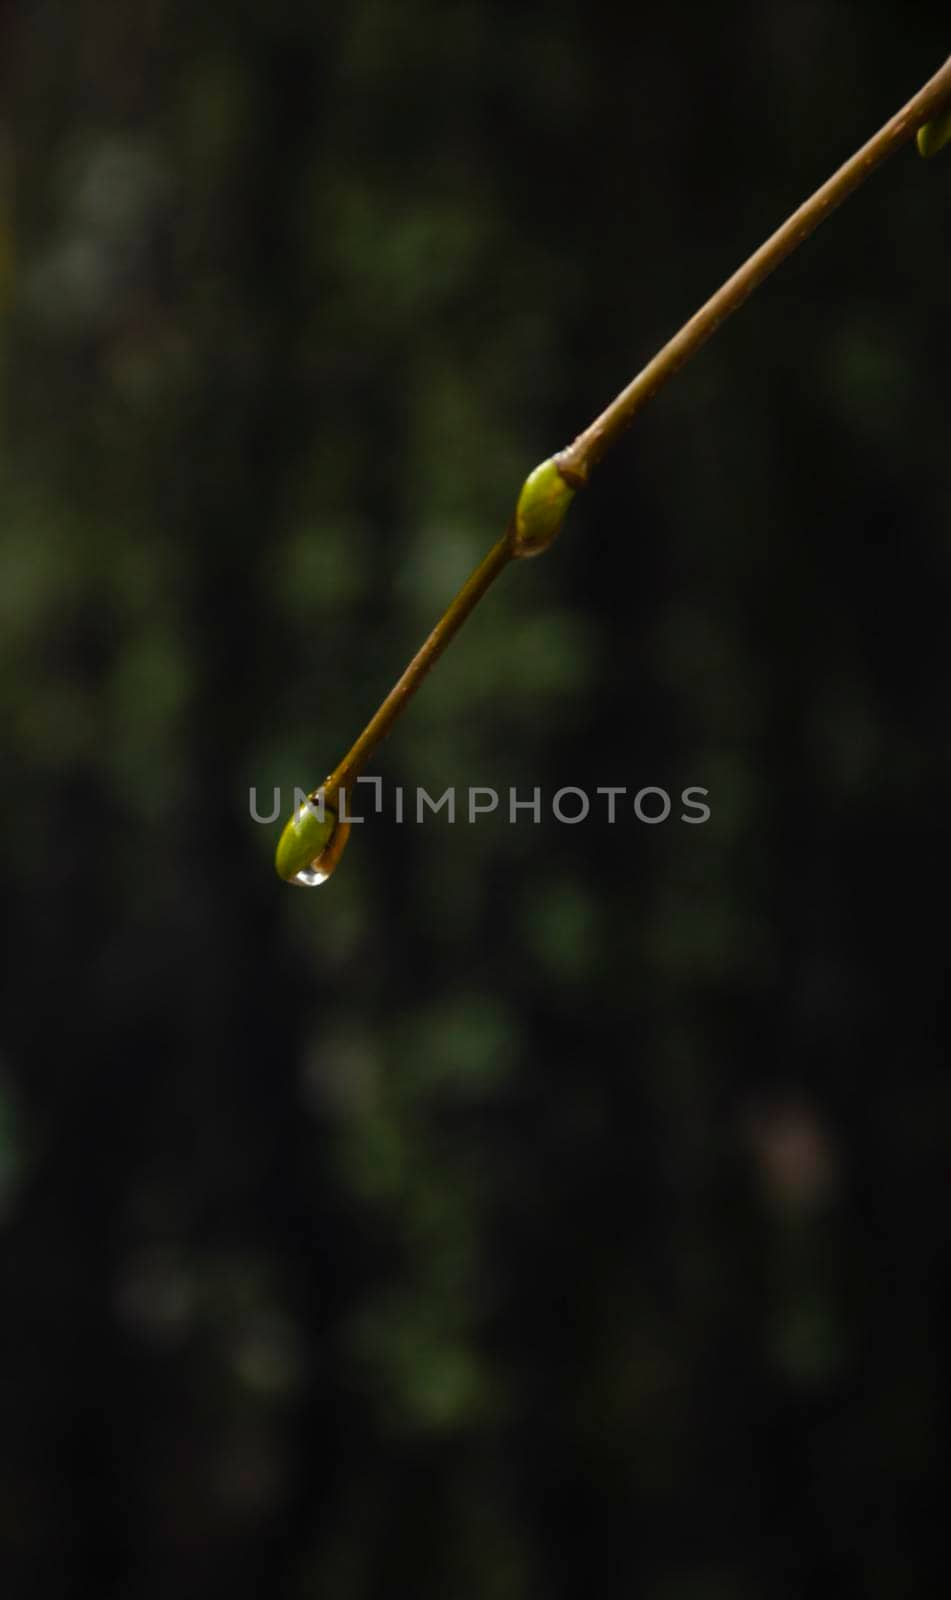 Raindrops on coniferous branches close-up. Soft focus, low key. Atmospheric natural photography. An isolated raindrop on a branch. Blurry dark background, warm colors, autumn scenery by mtx